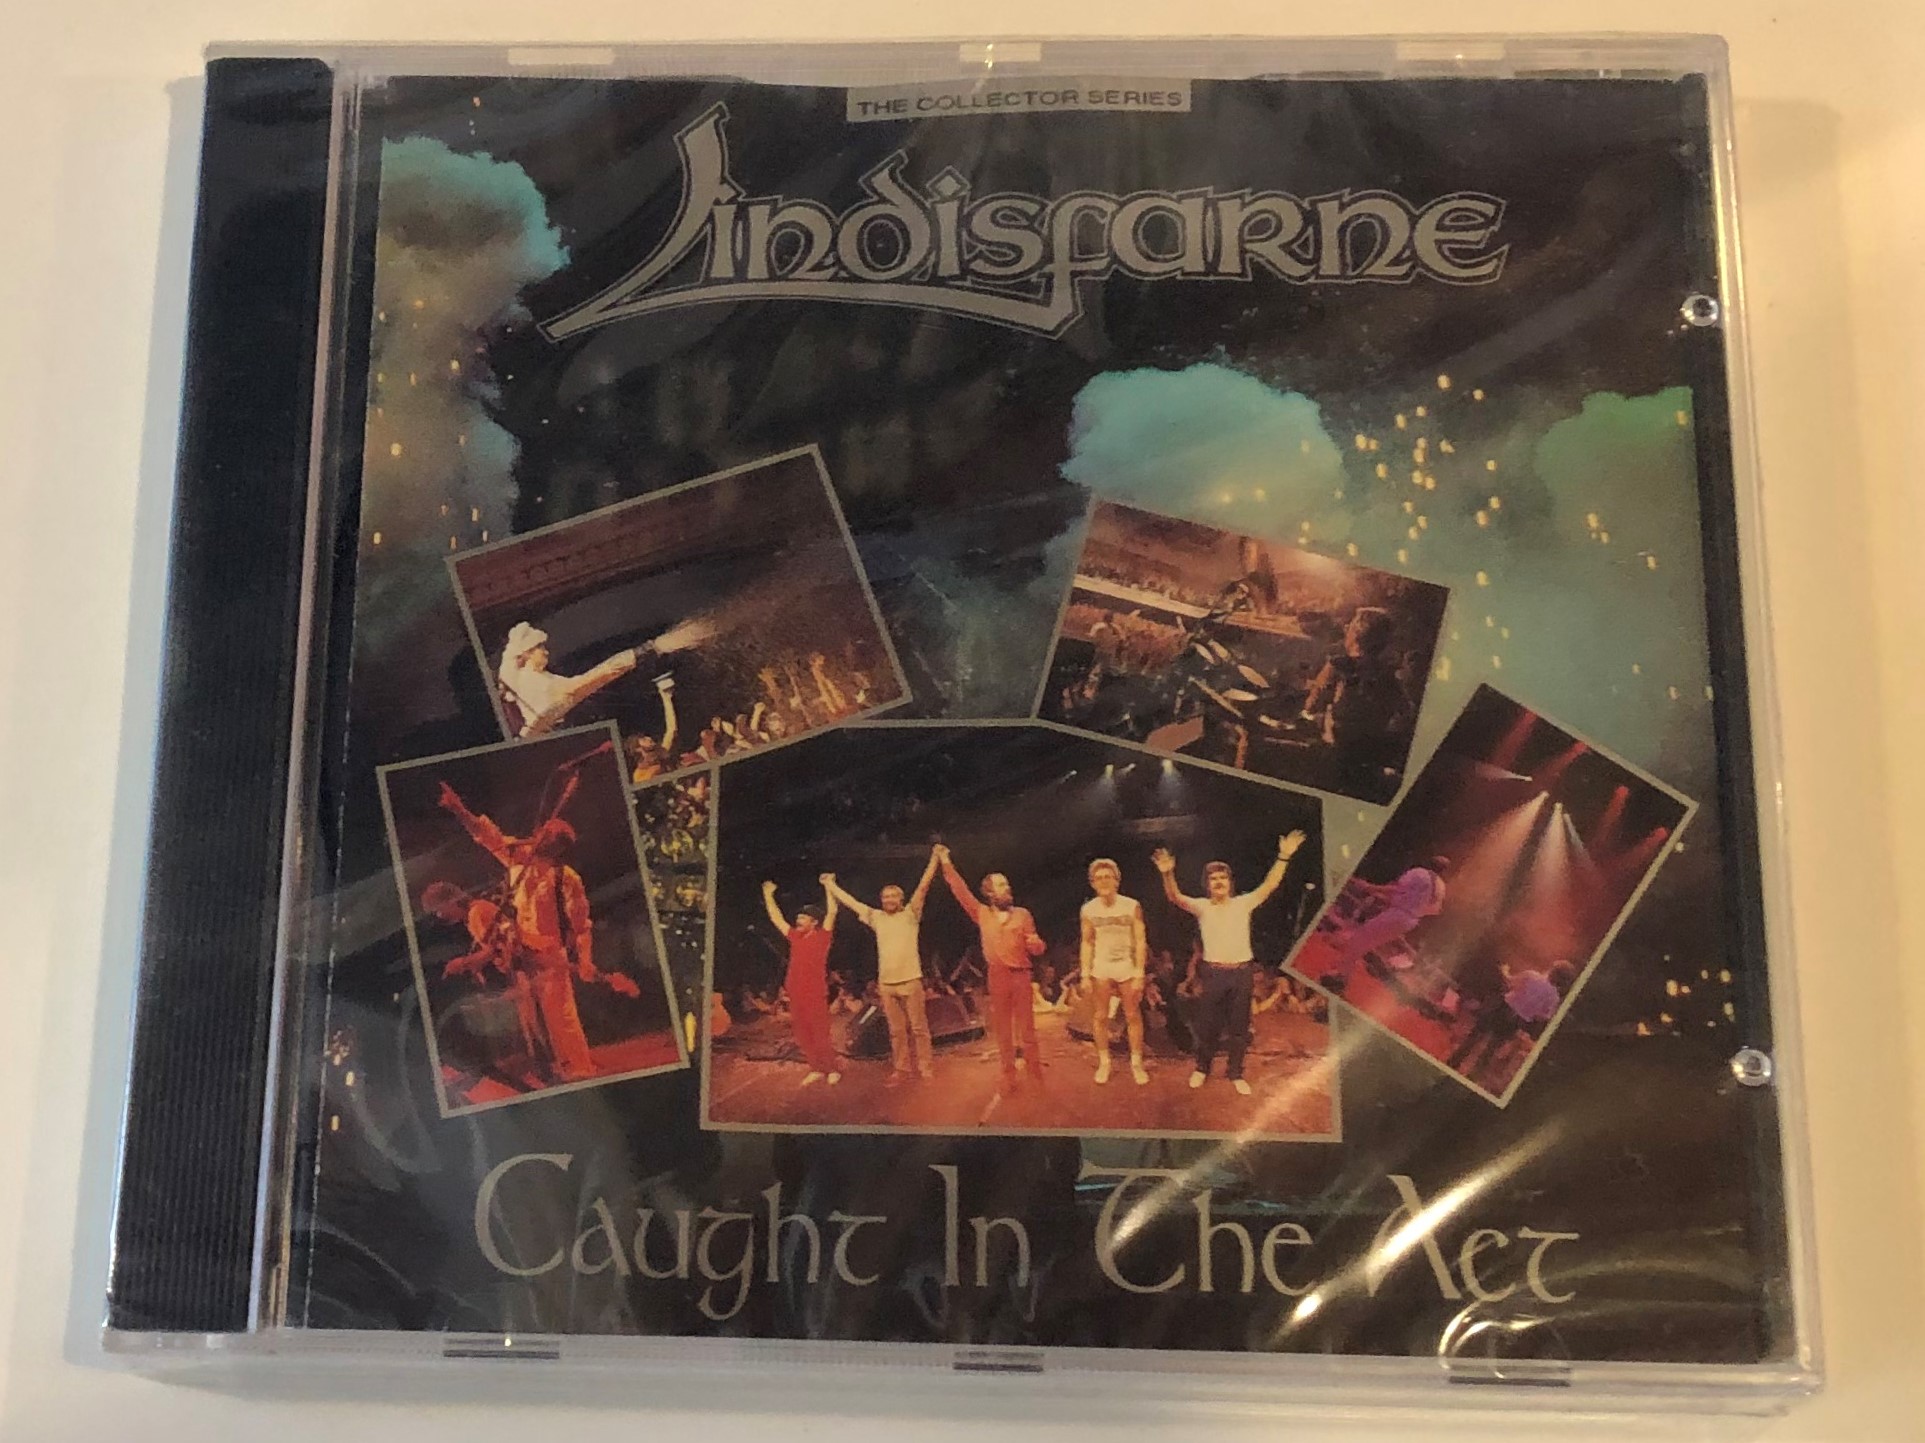 lindisfarne-caught-in-the-act-the-collection-series-castle-communications-audio-cd-1992-ccscd-346-1-.jpg